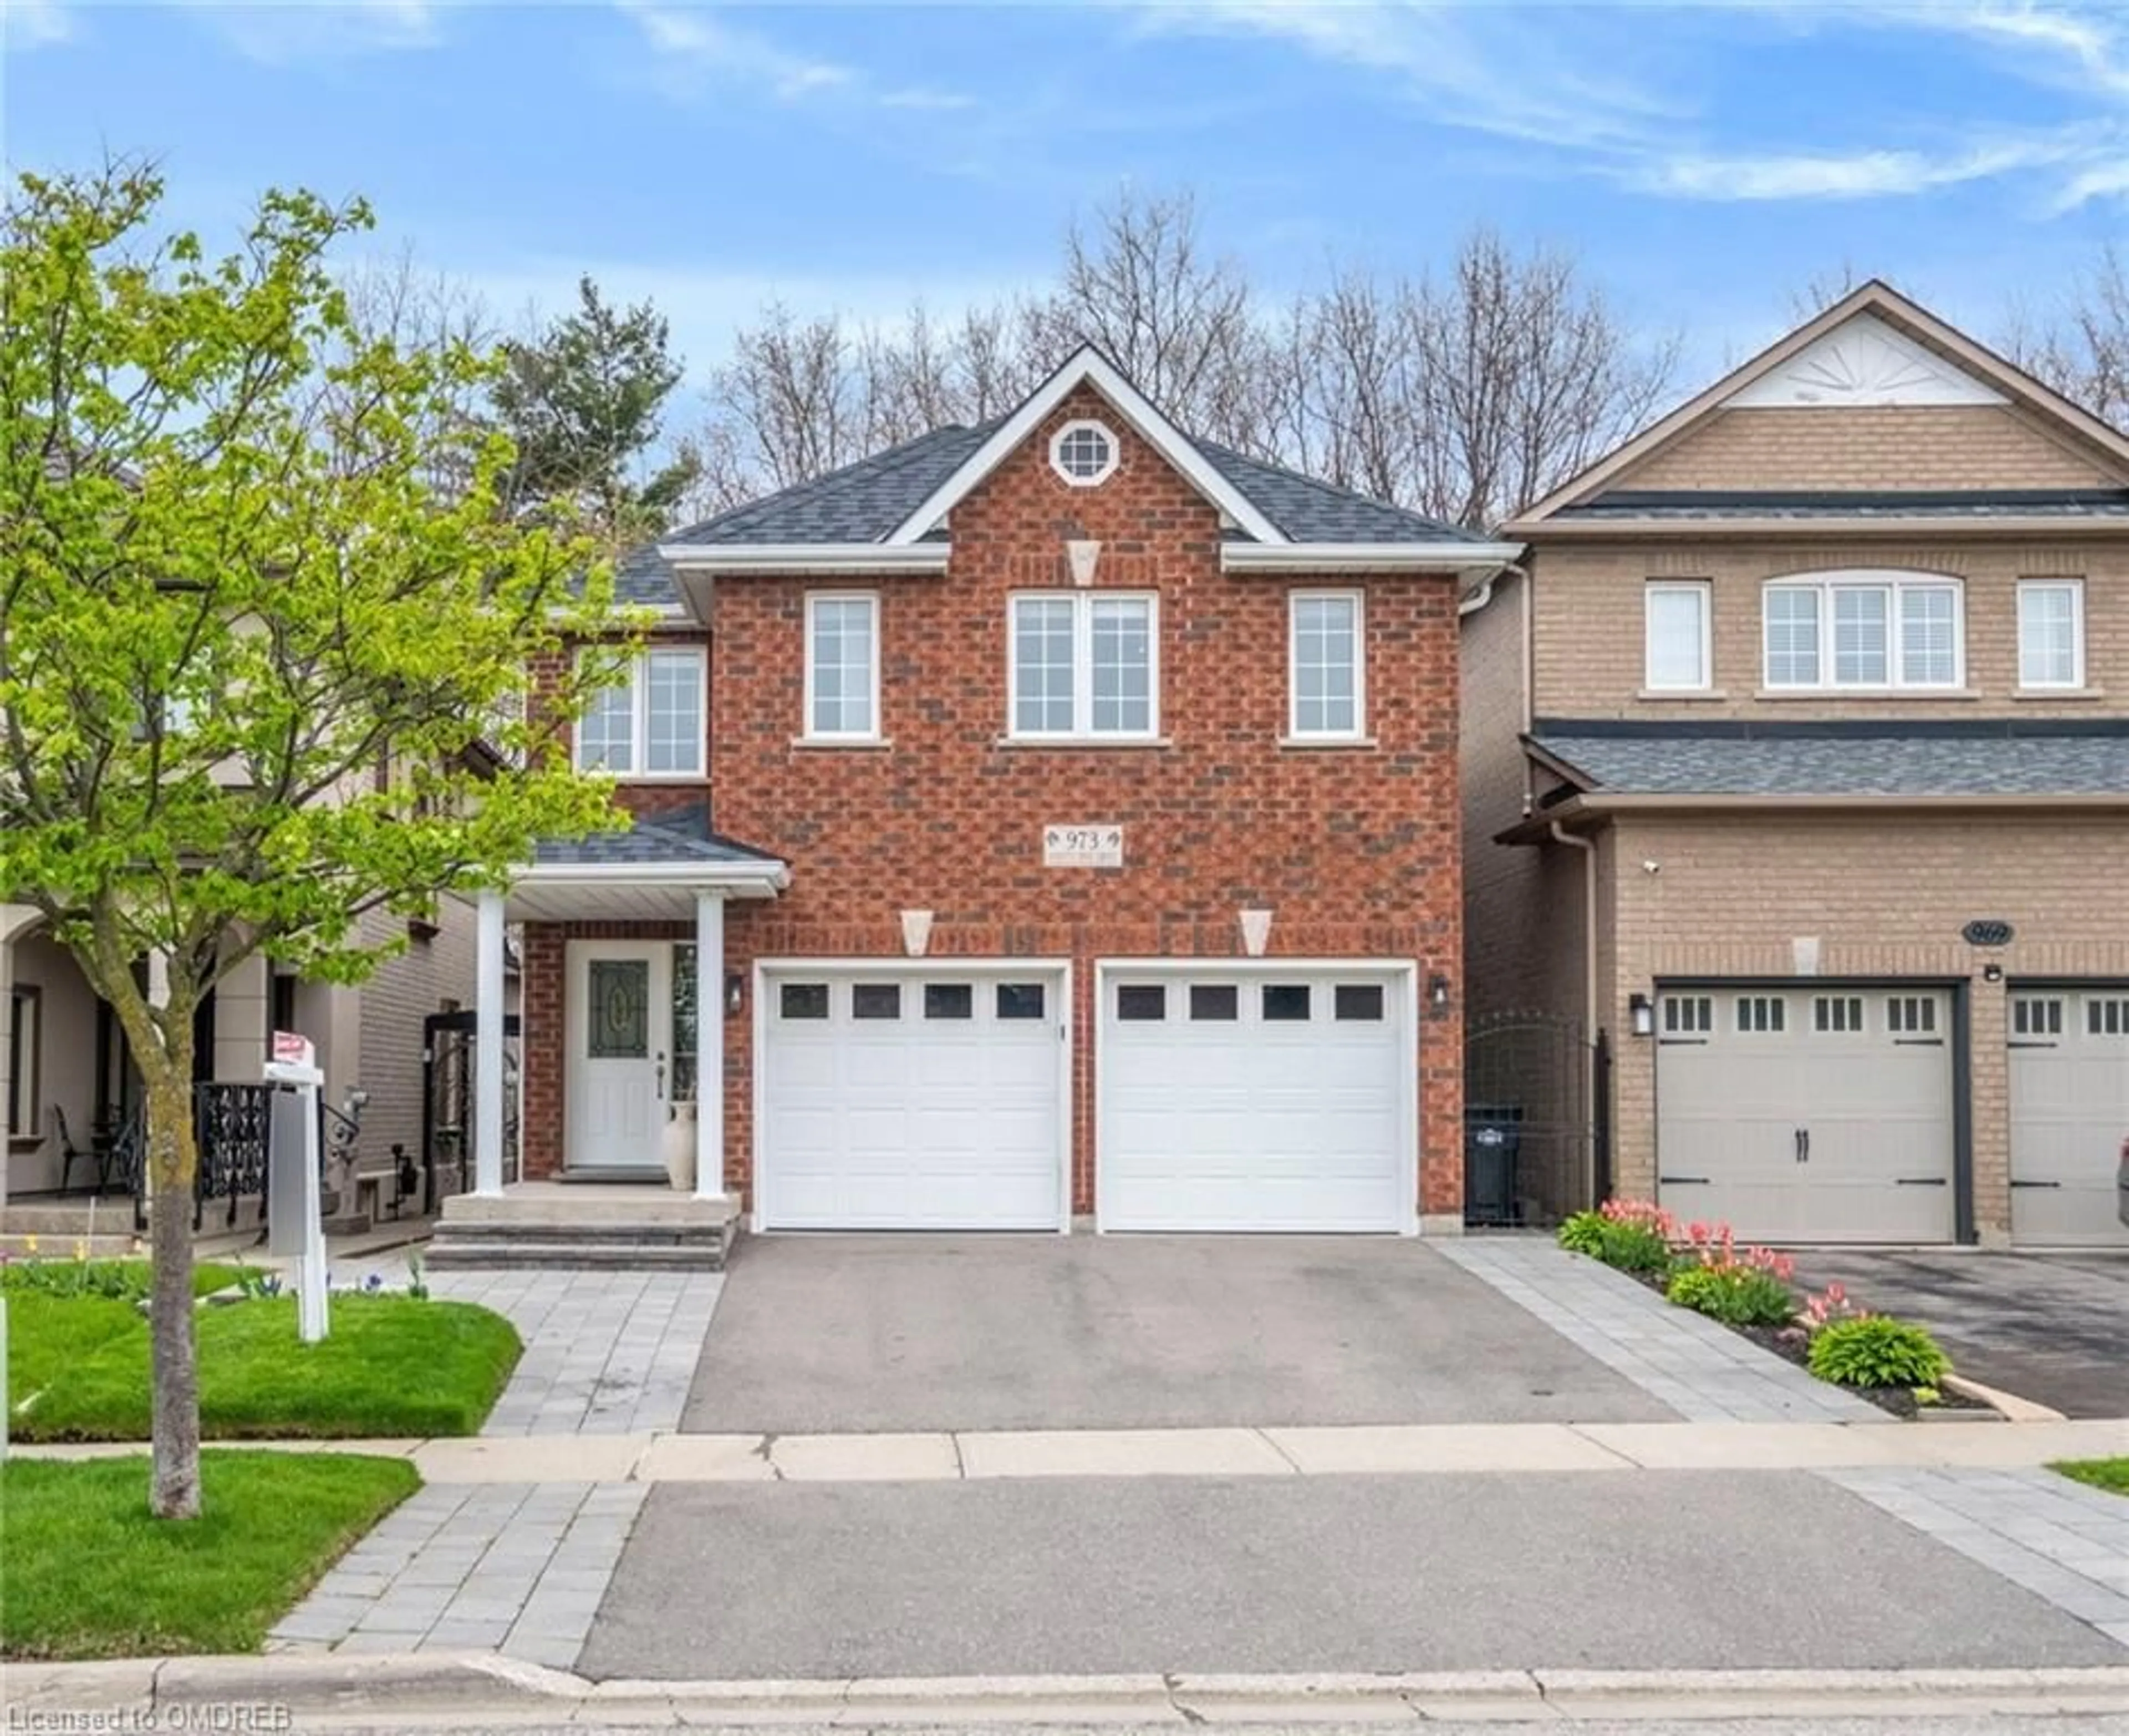 Home with brick exterior material for 973 Knotty Pine Grove, Mississauga Ontario L5W 1J9